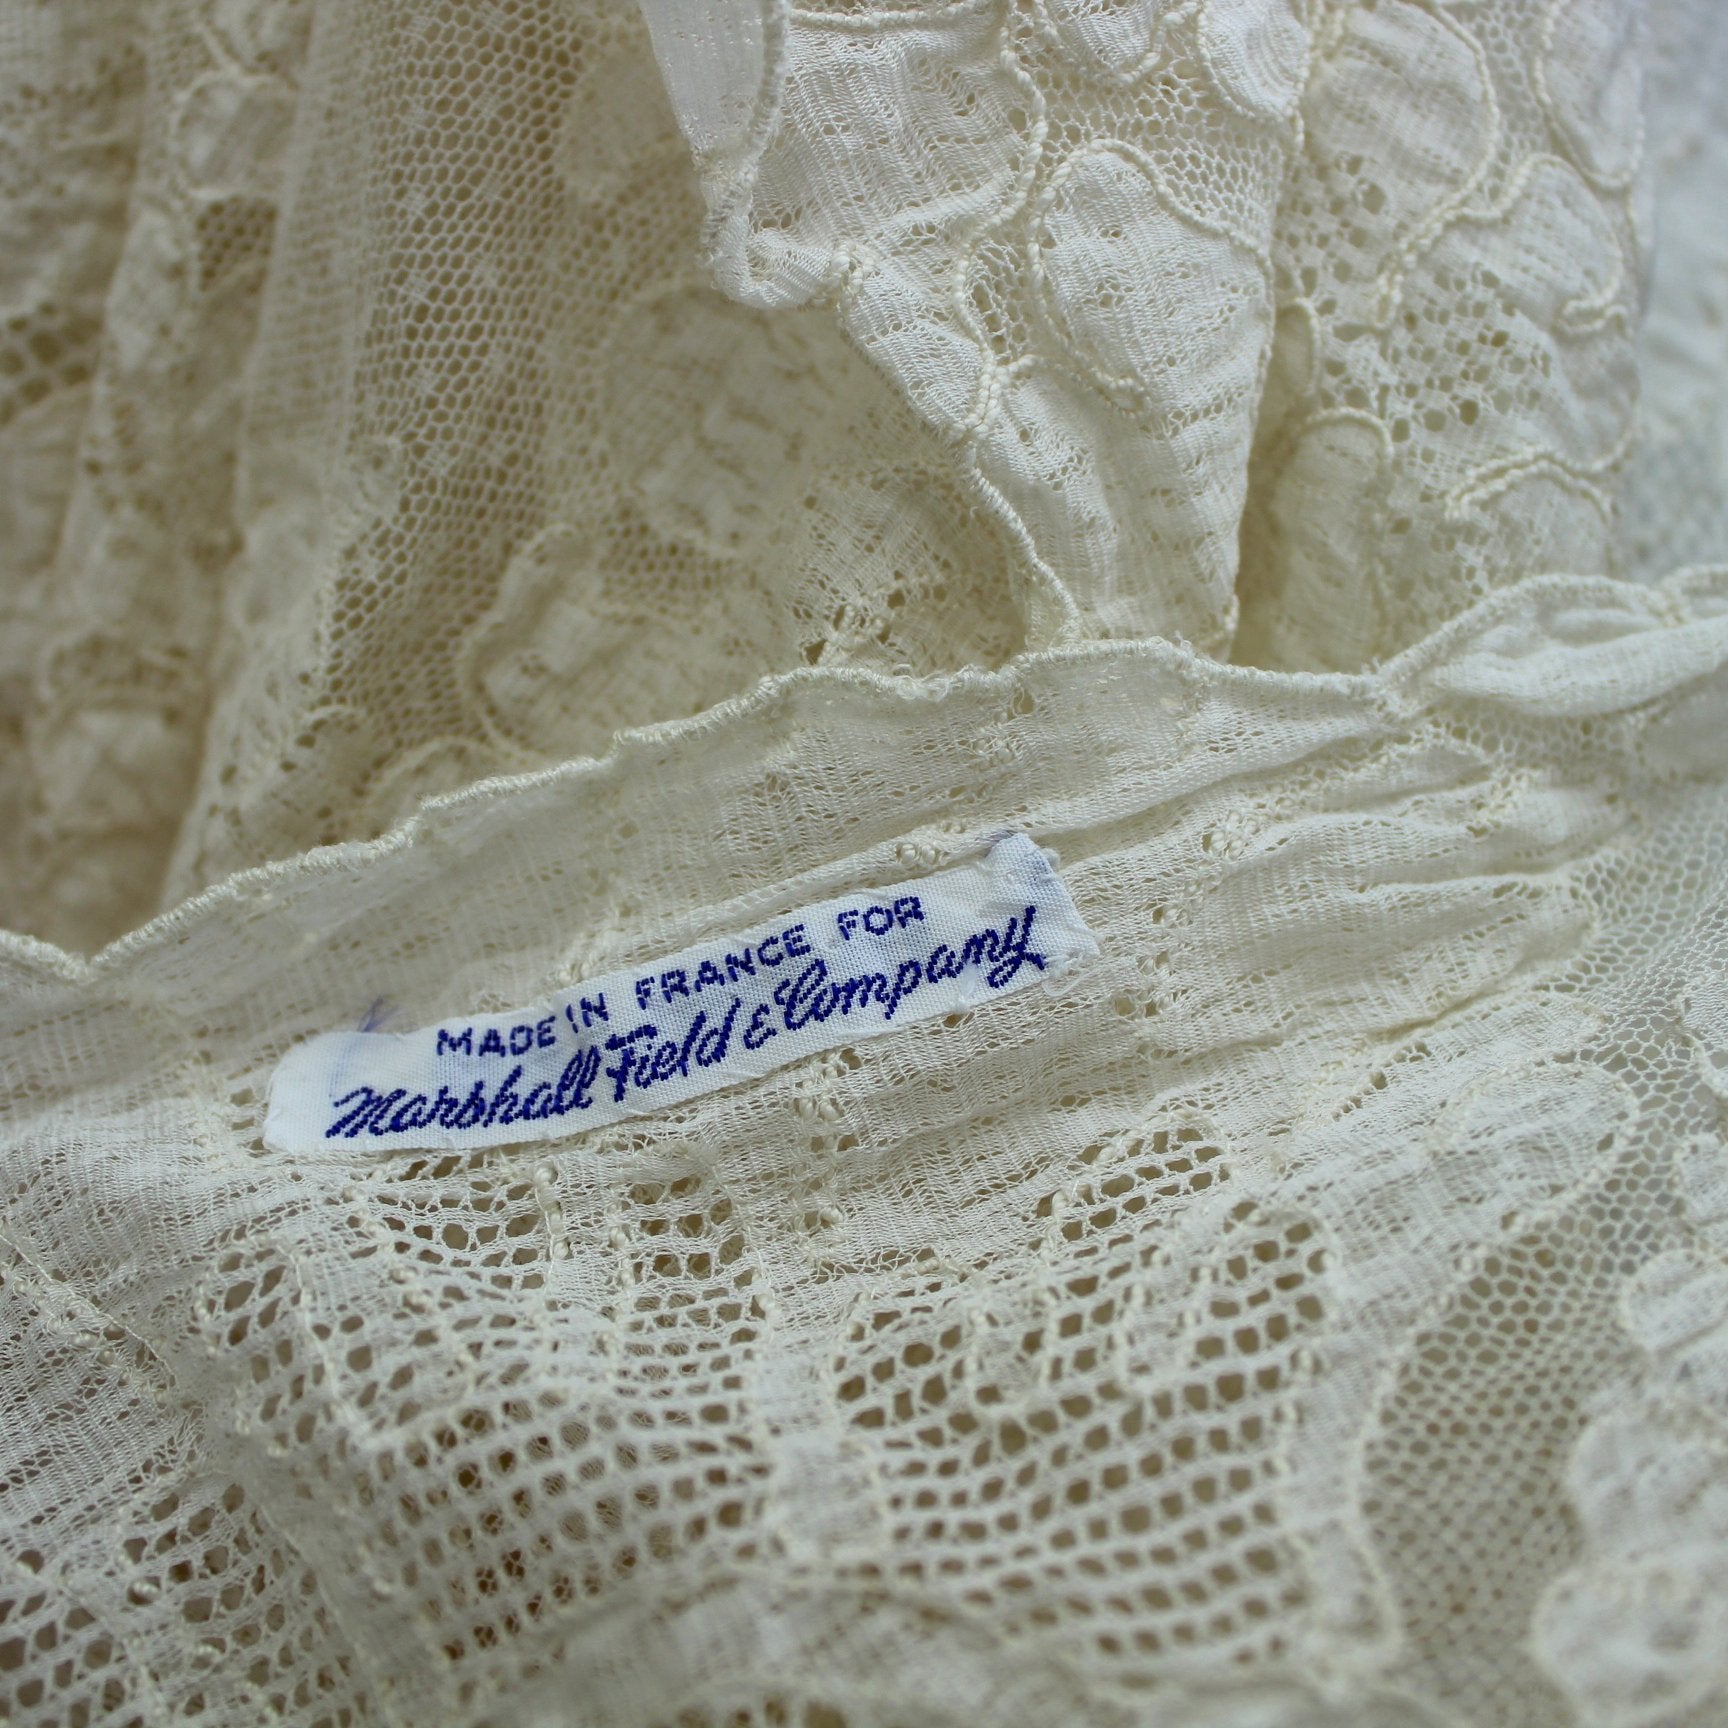 Alencon Cream Lace Tablecloth France Made for Marshall Field Exquisite original label